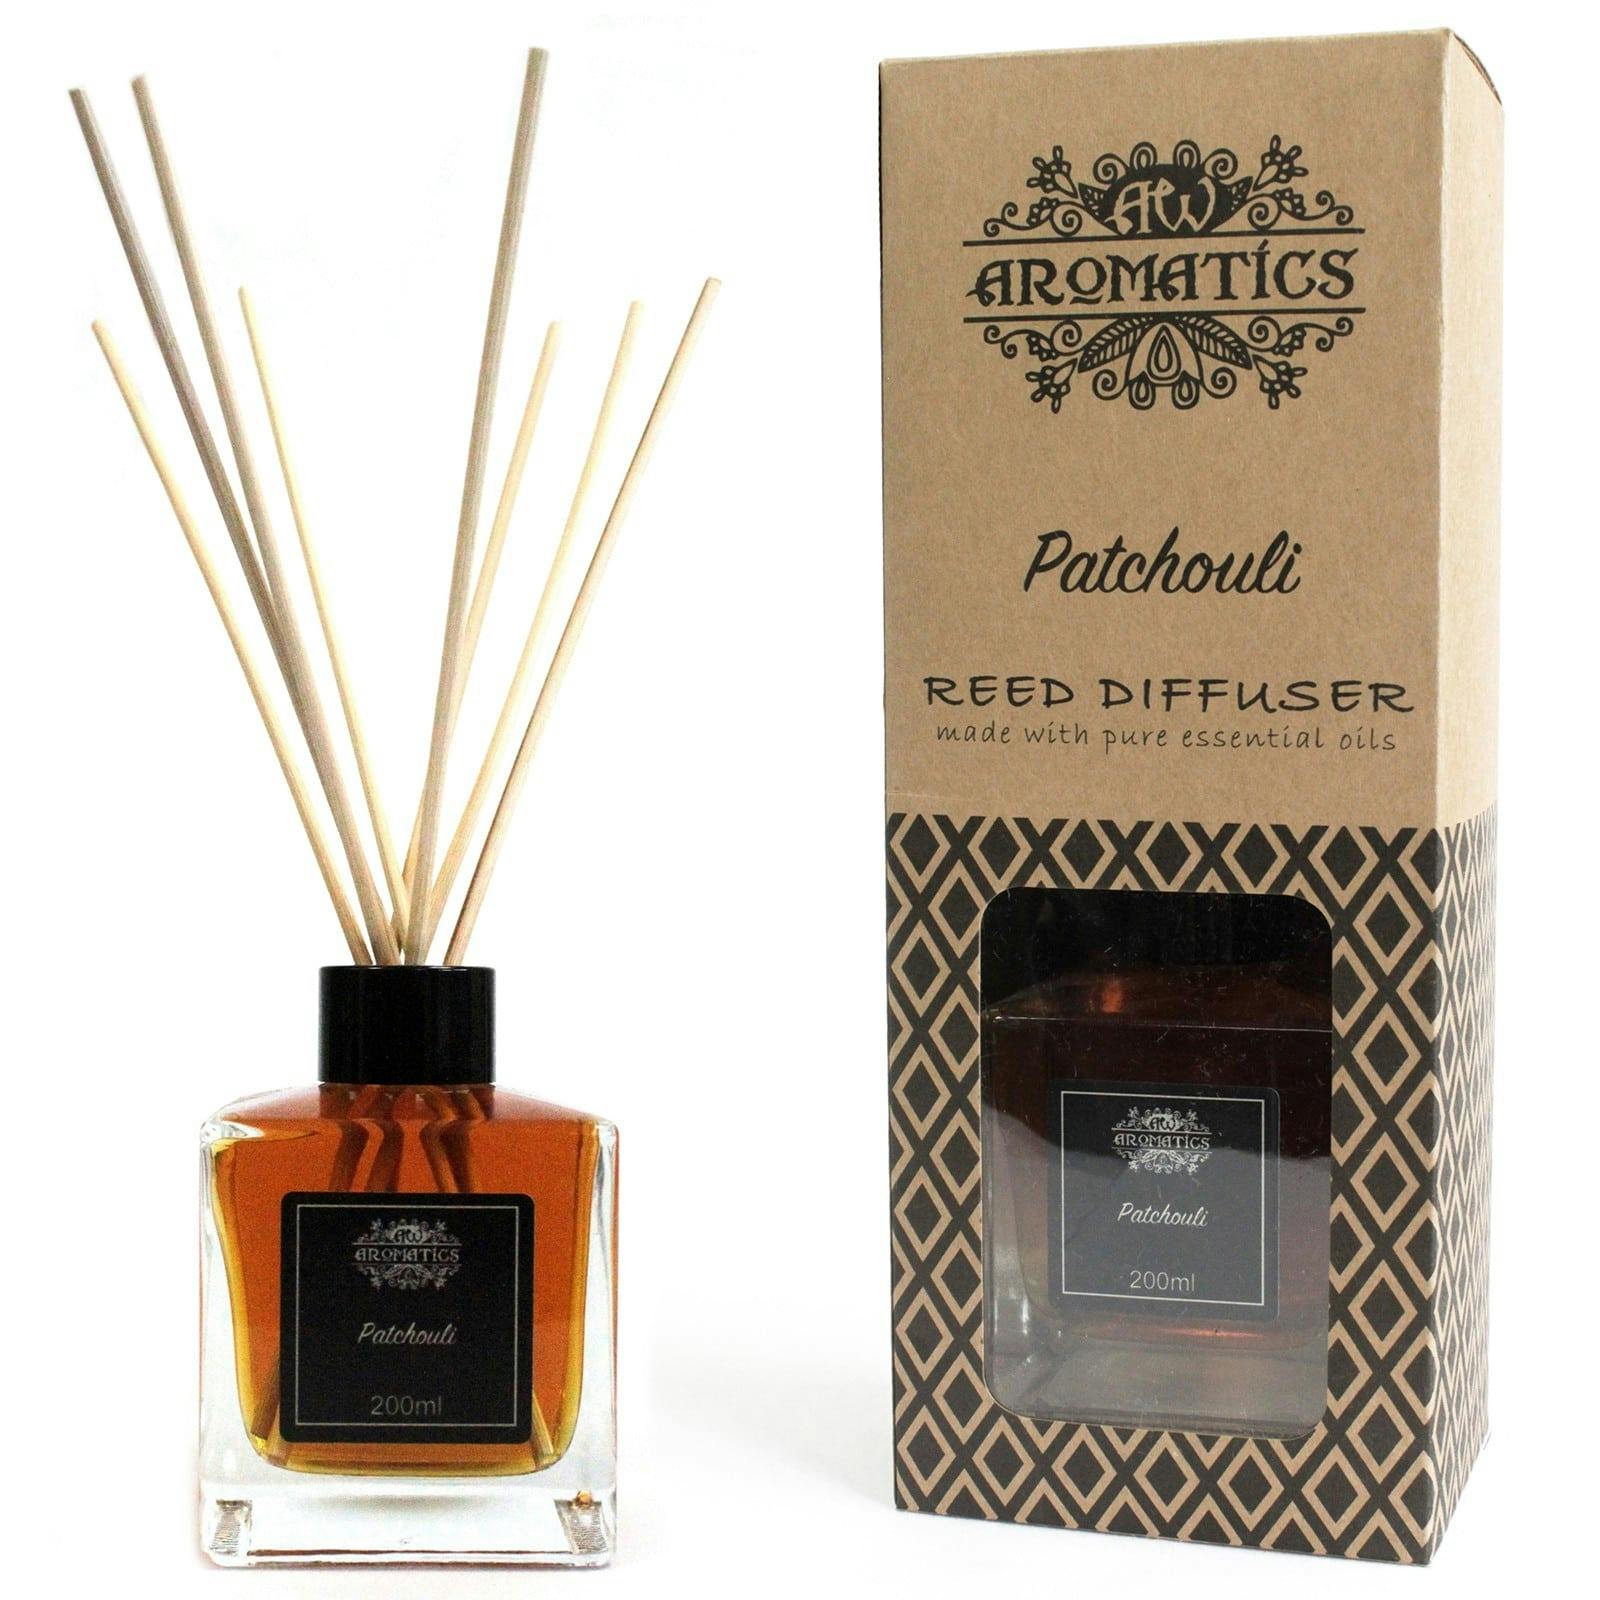 200ml Patchouli Essential Oil Reed Diffuser Image